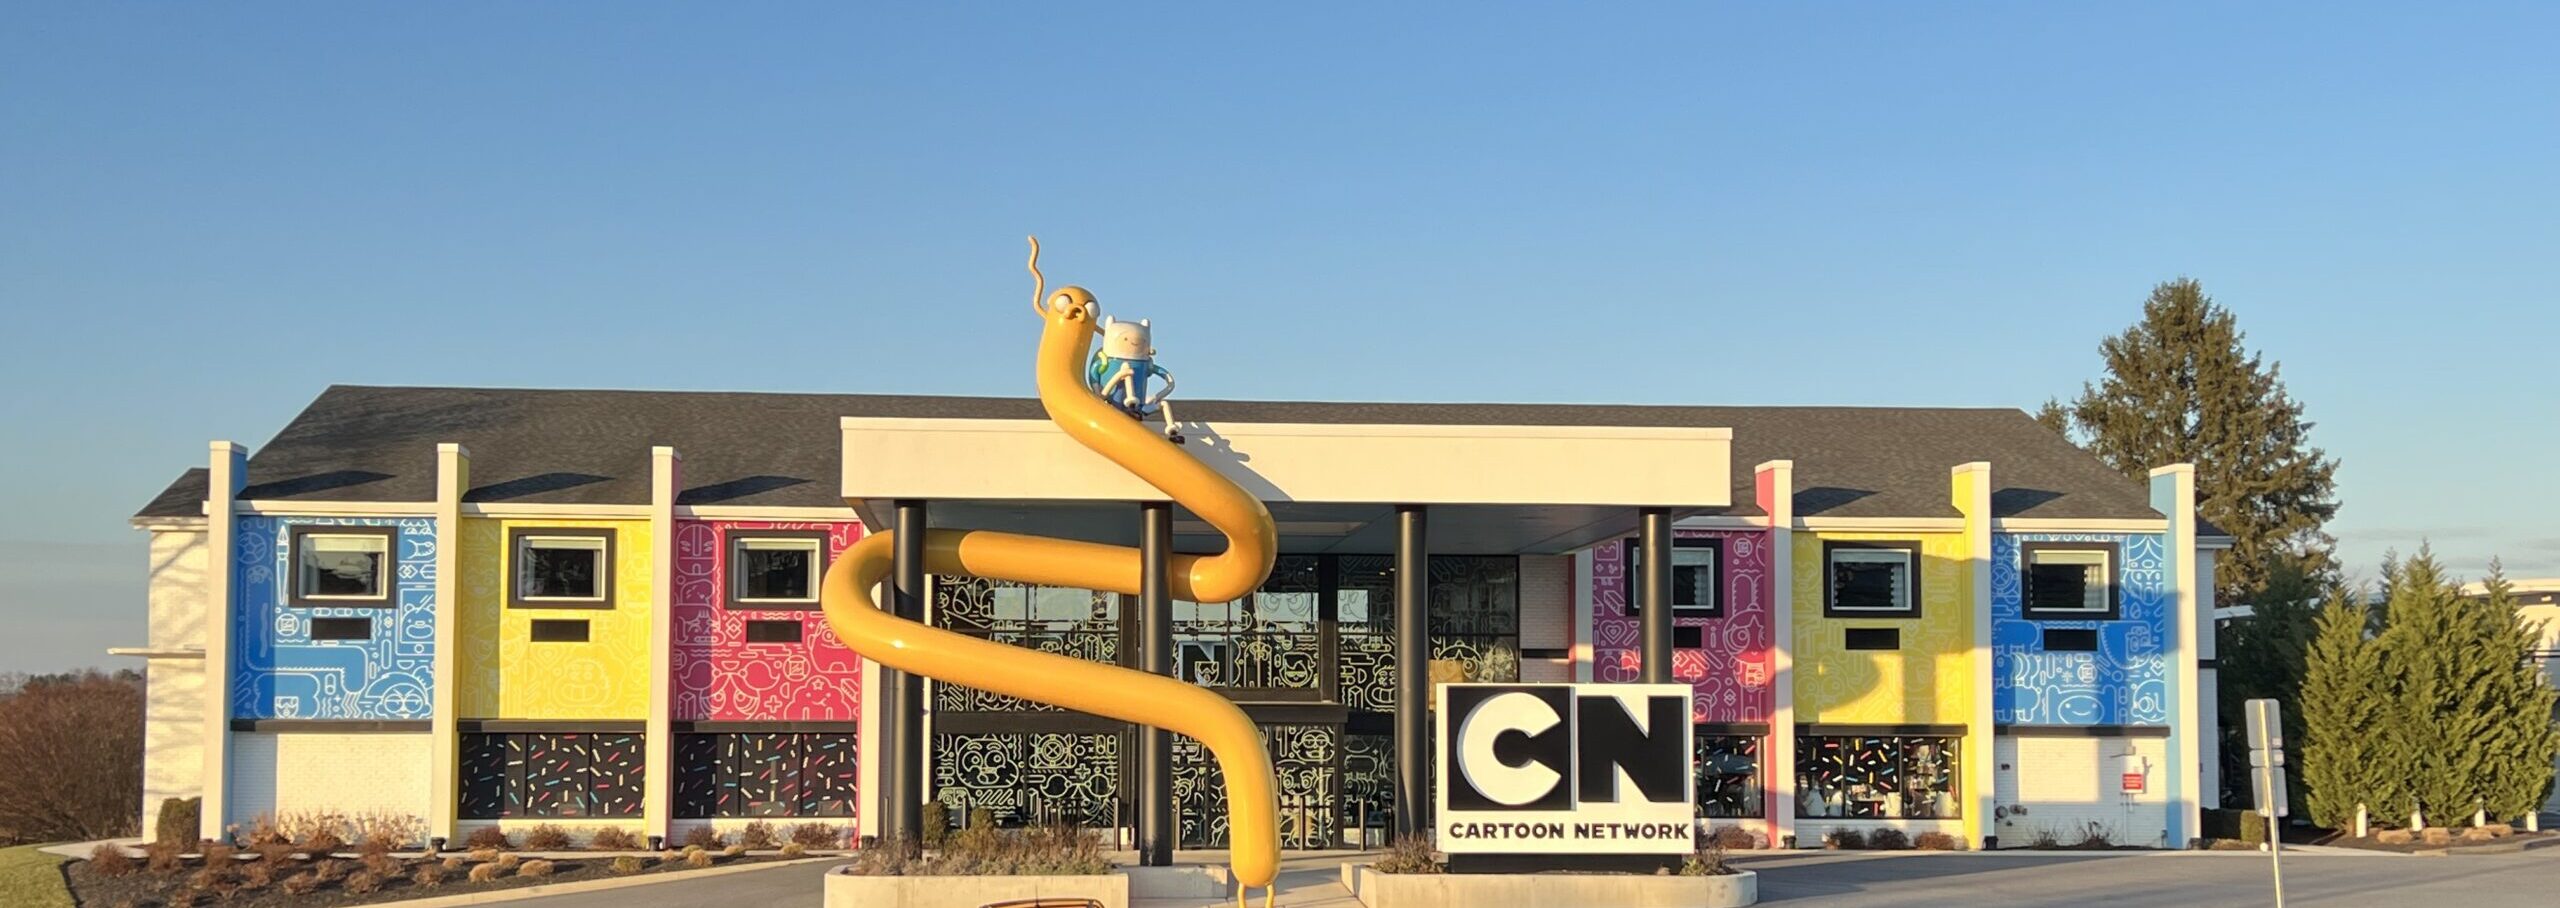 Is the Cartoon Network Hotel Accessible for Special Needs Families?